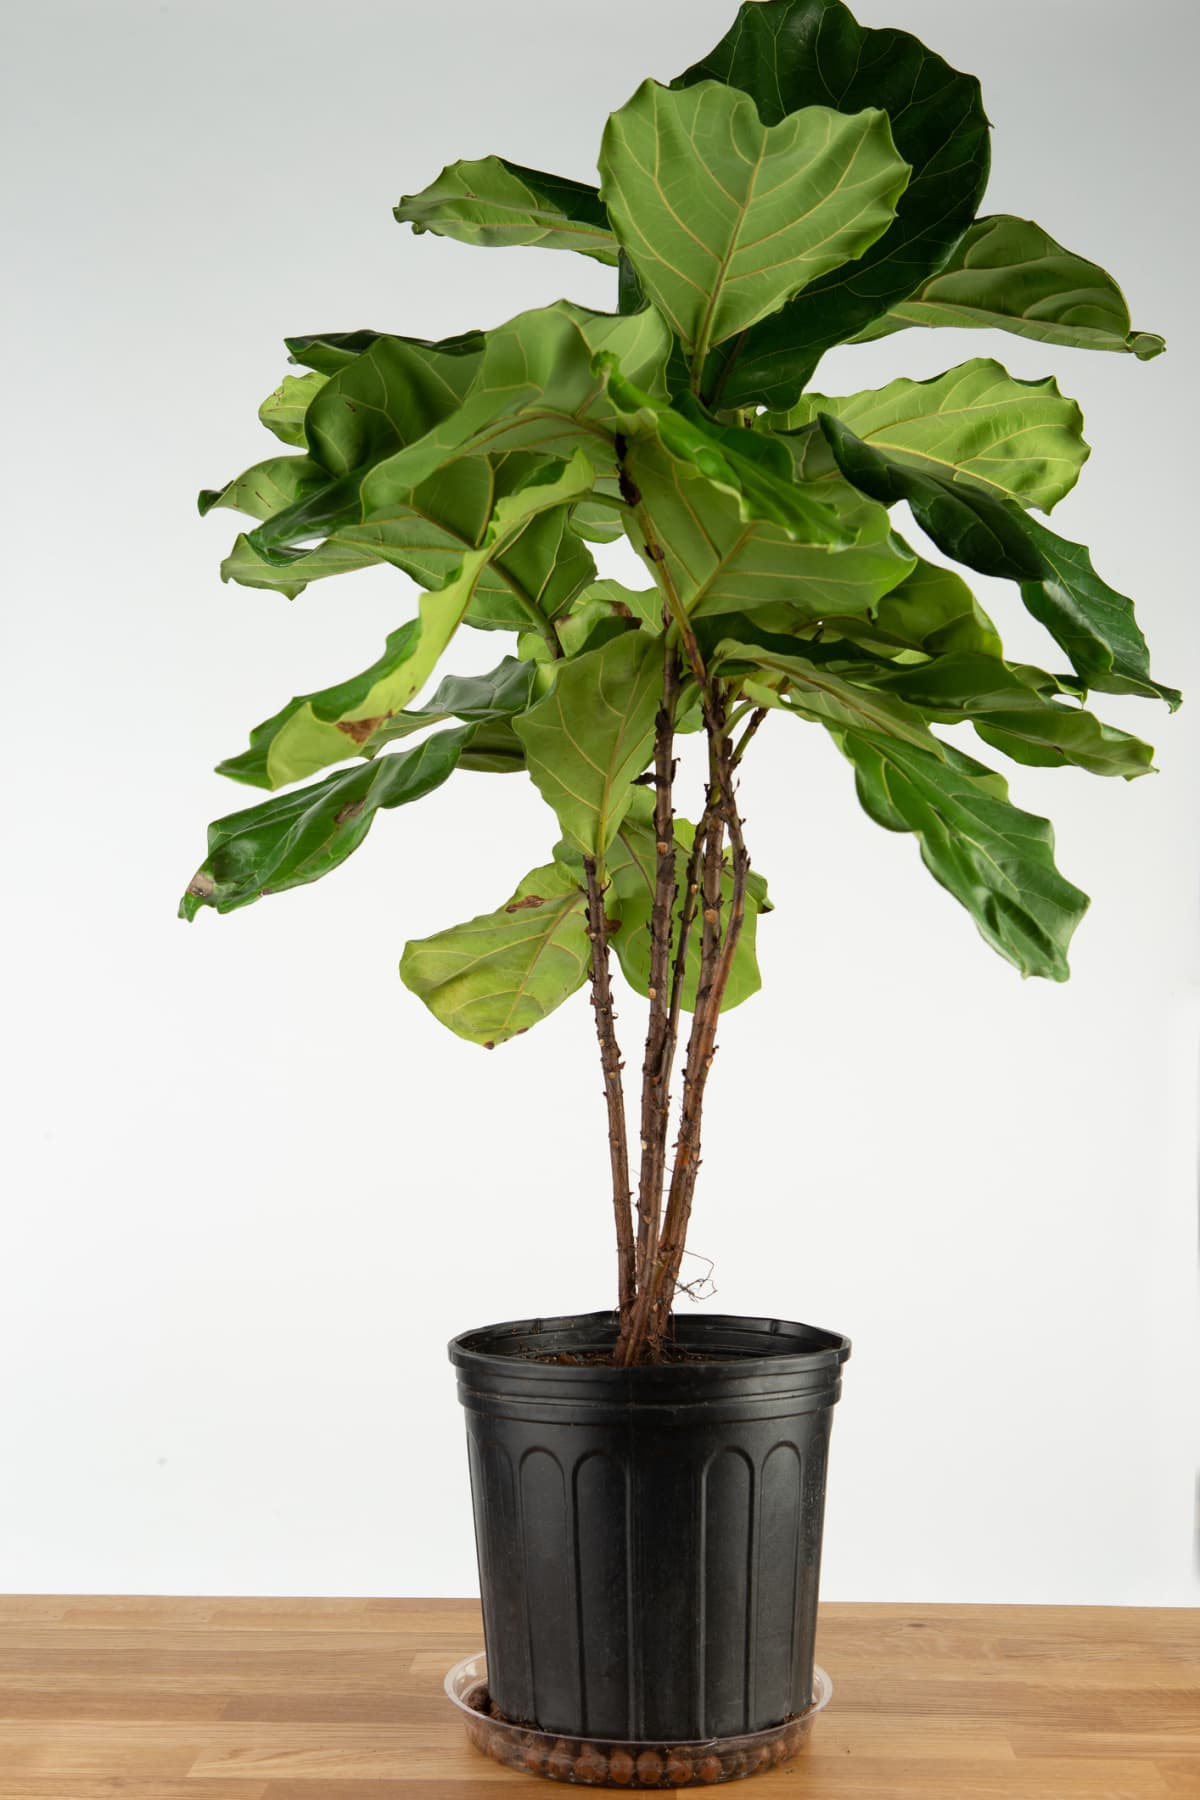 A potted fiddle leaf fig on a wooden floor